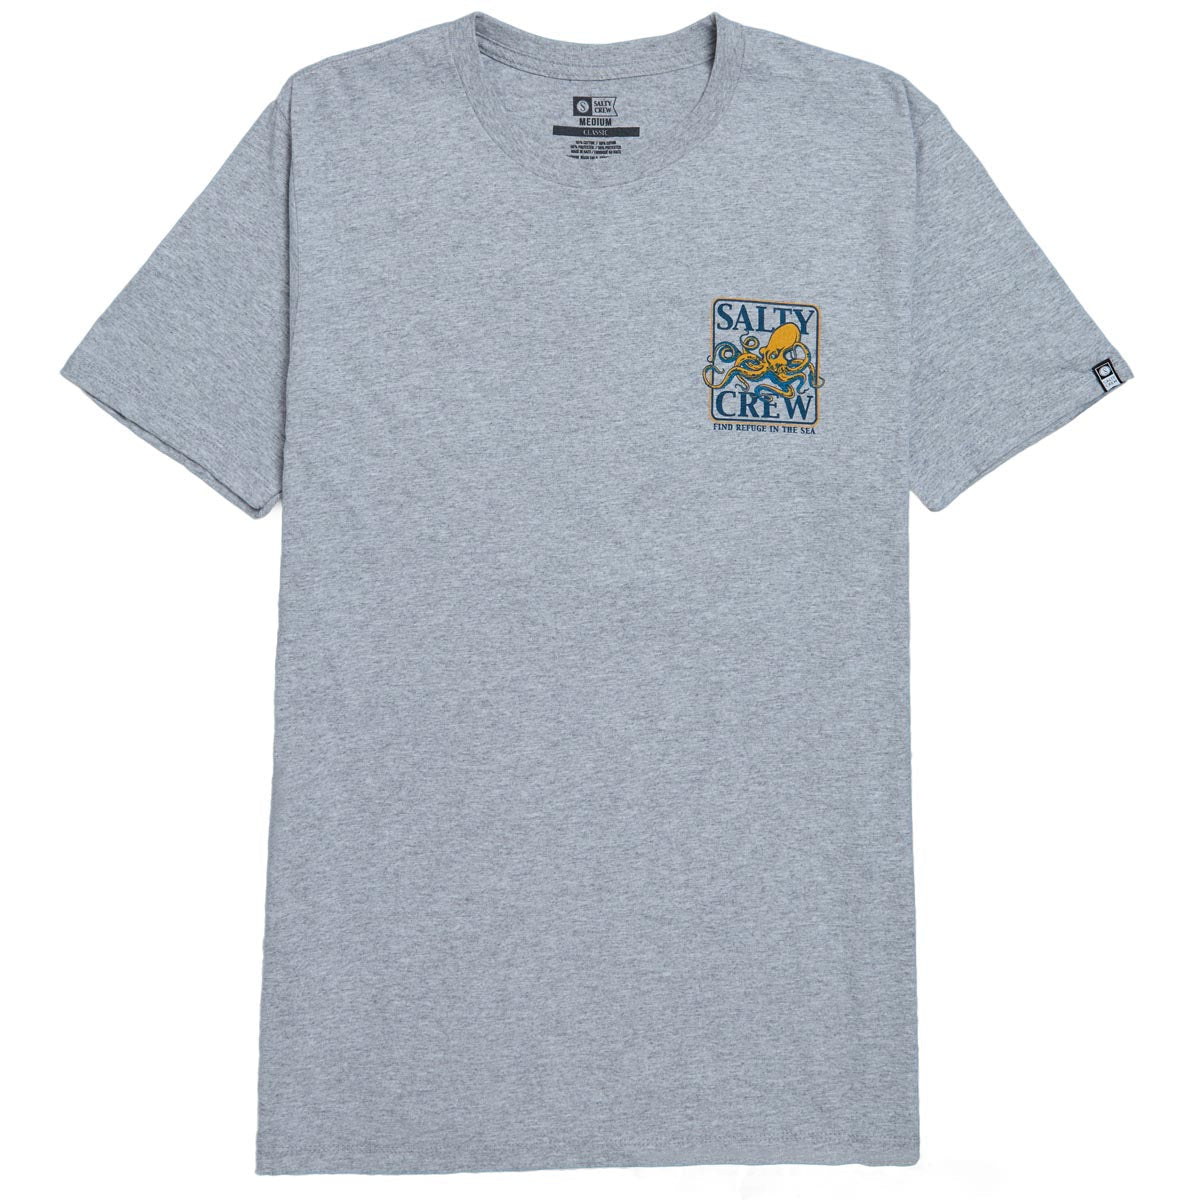 Salty Crew Ink Slinger Classic T-Shirt - Athletic Heather image 4